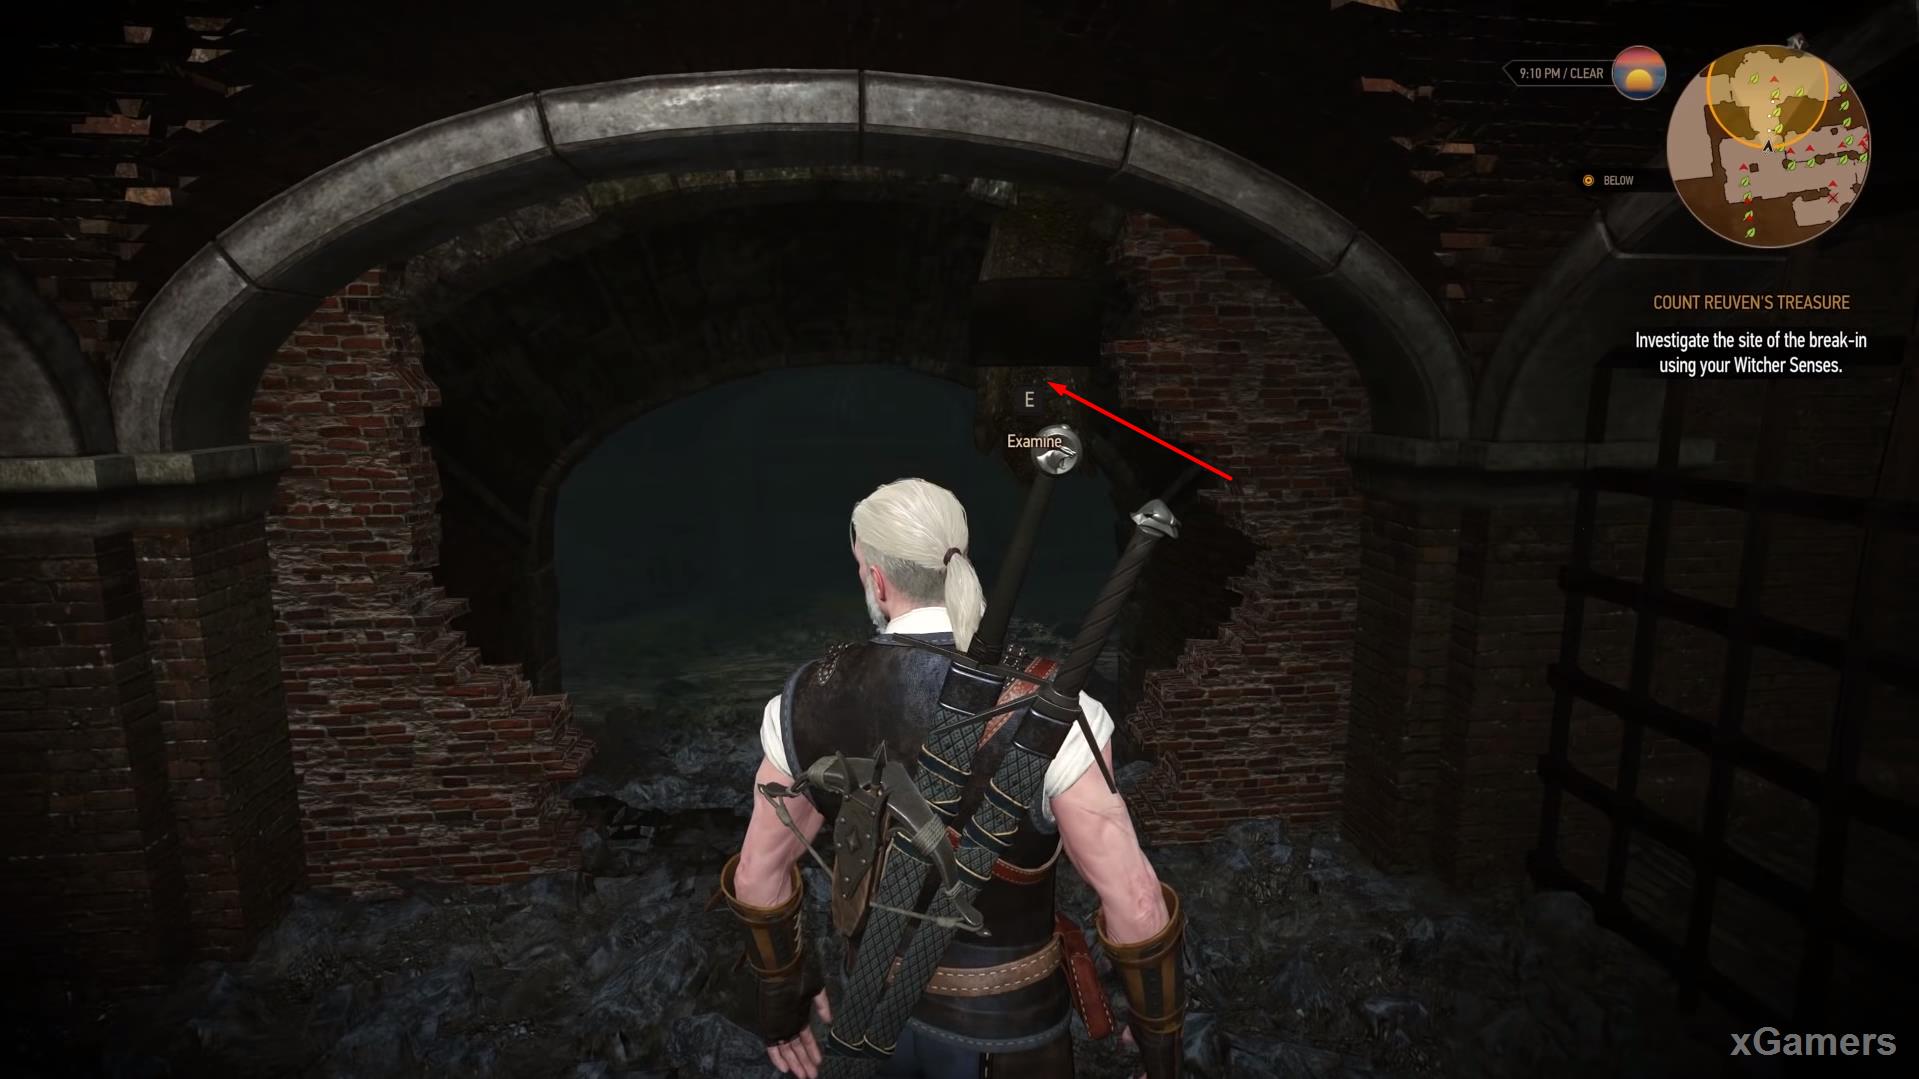 Geralt finds the remains of a ruptured pipe